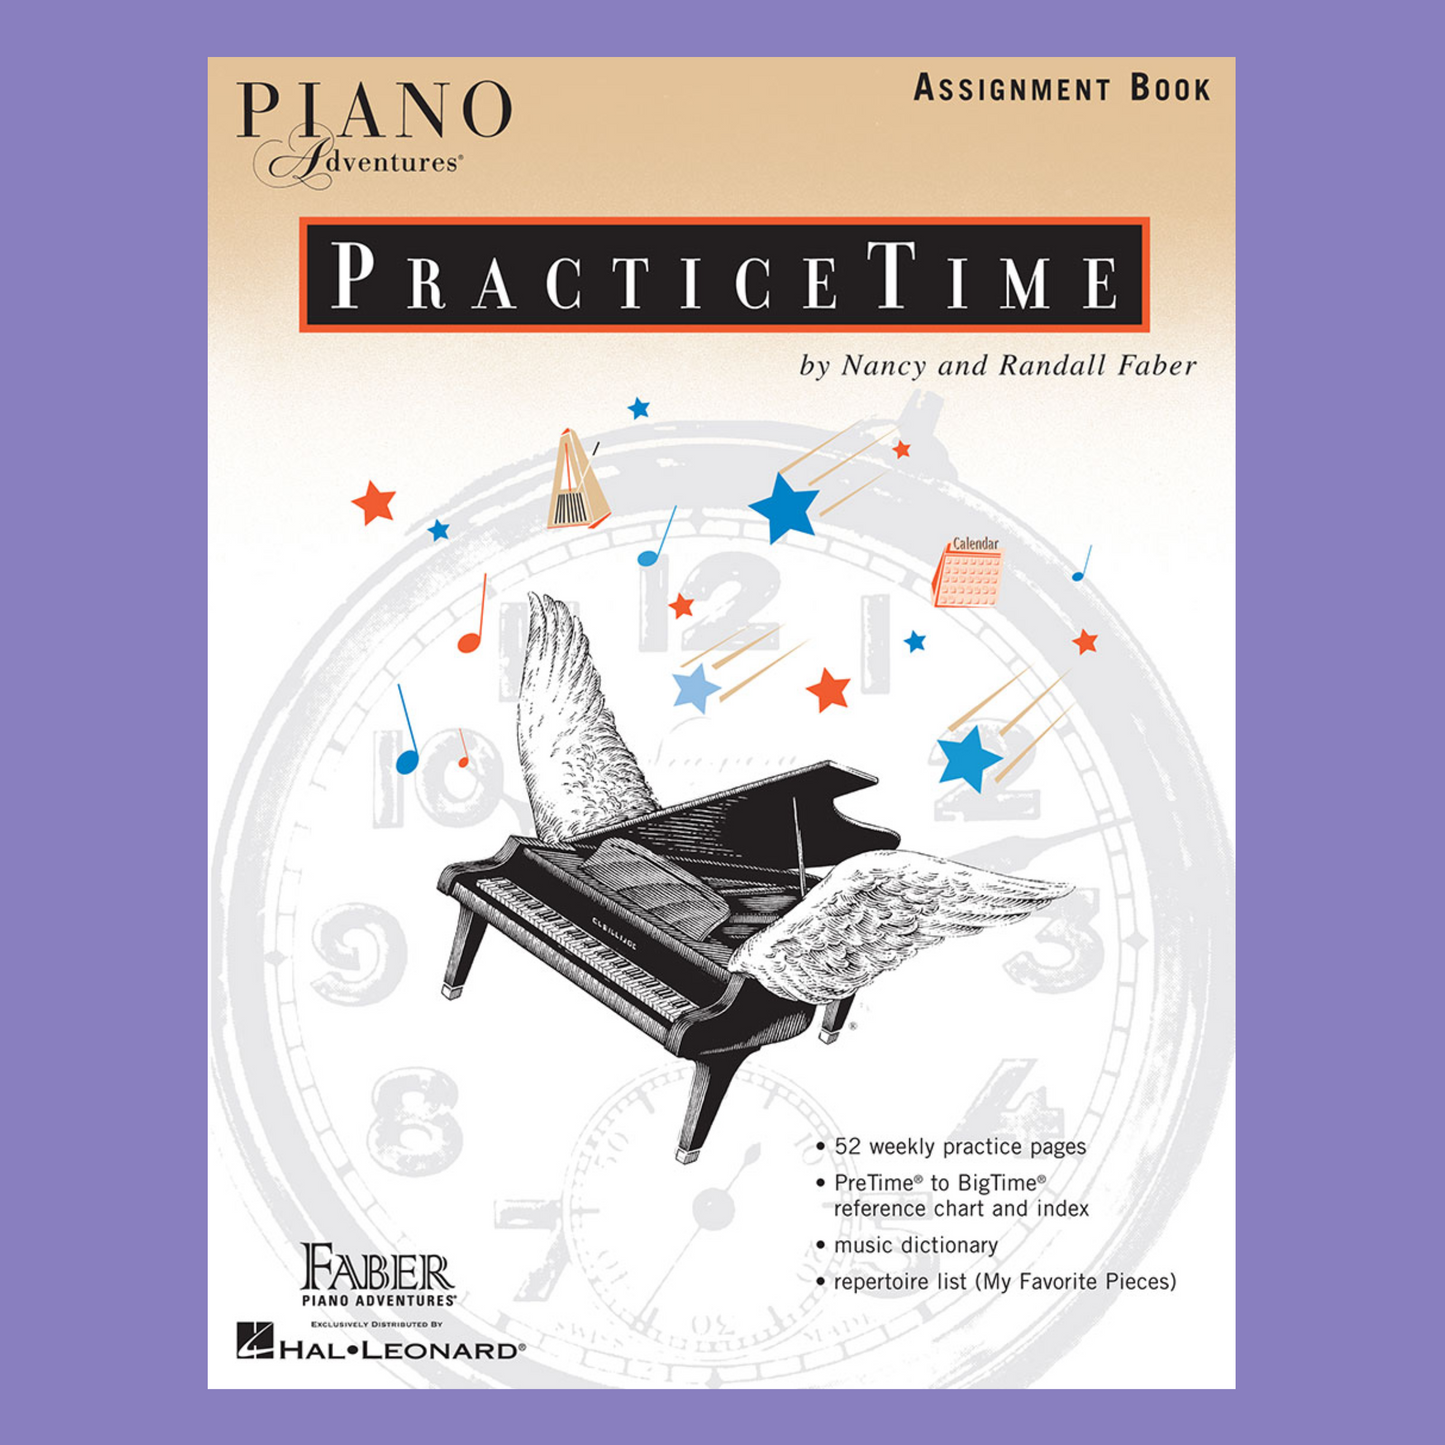 Piano Adventures: Practice Time Assignment Book